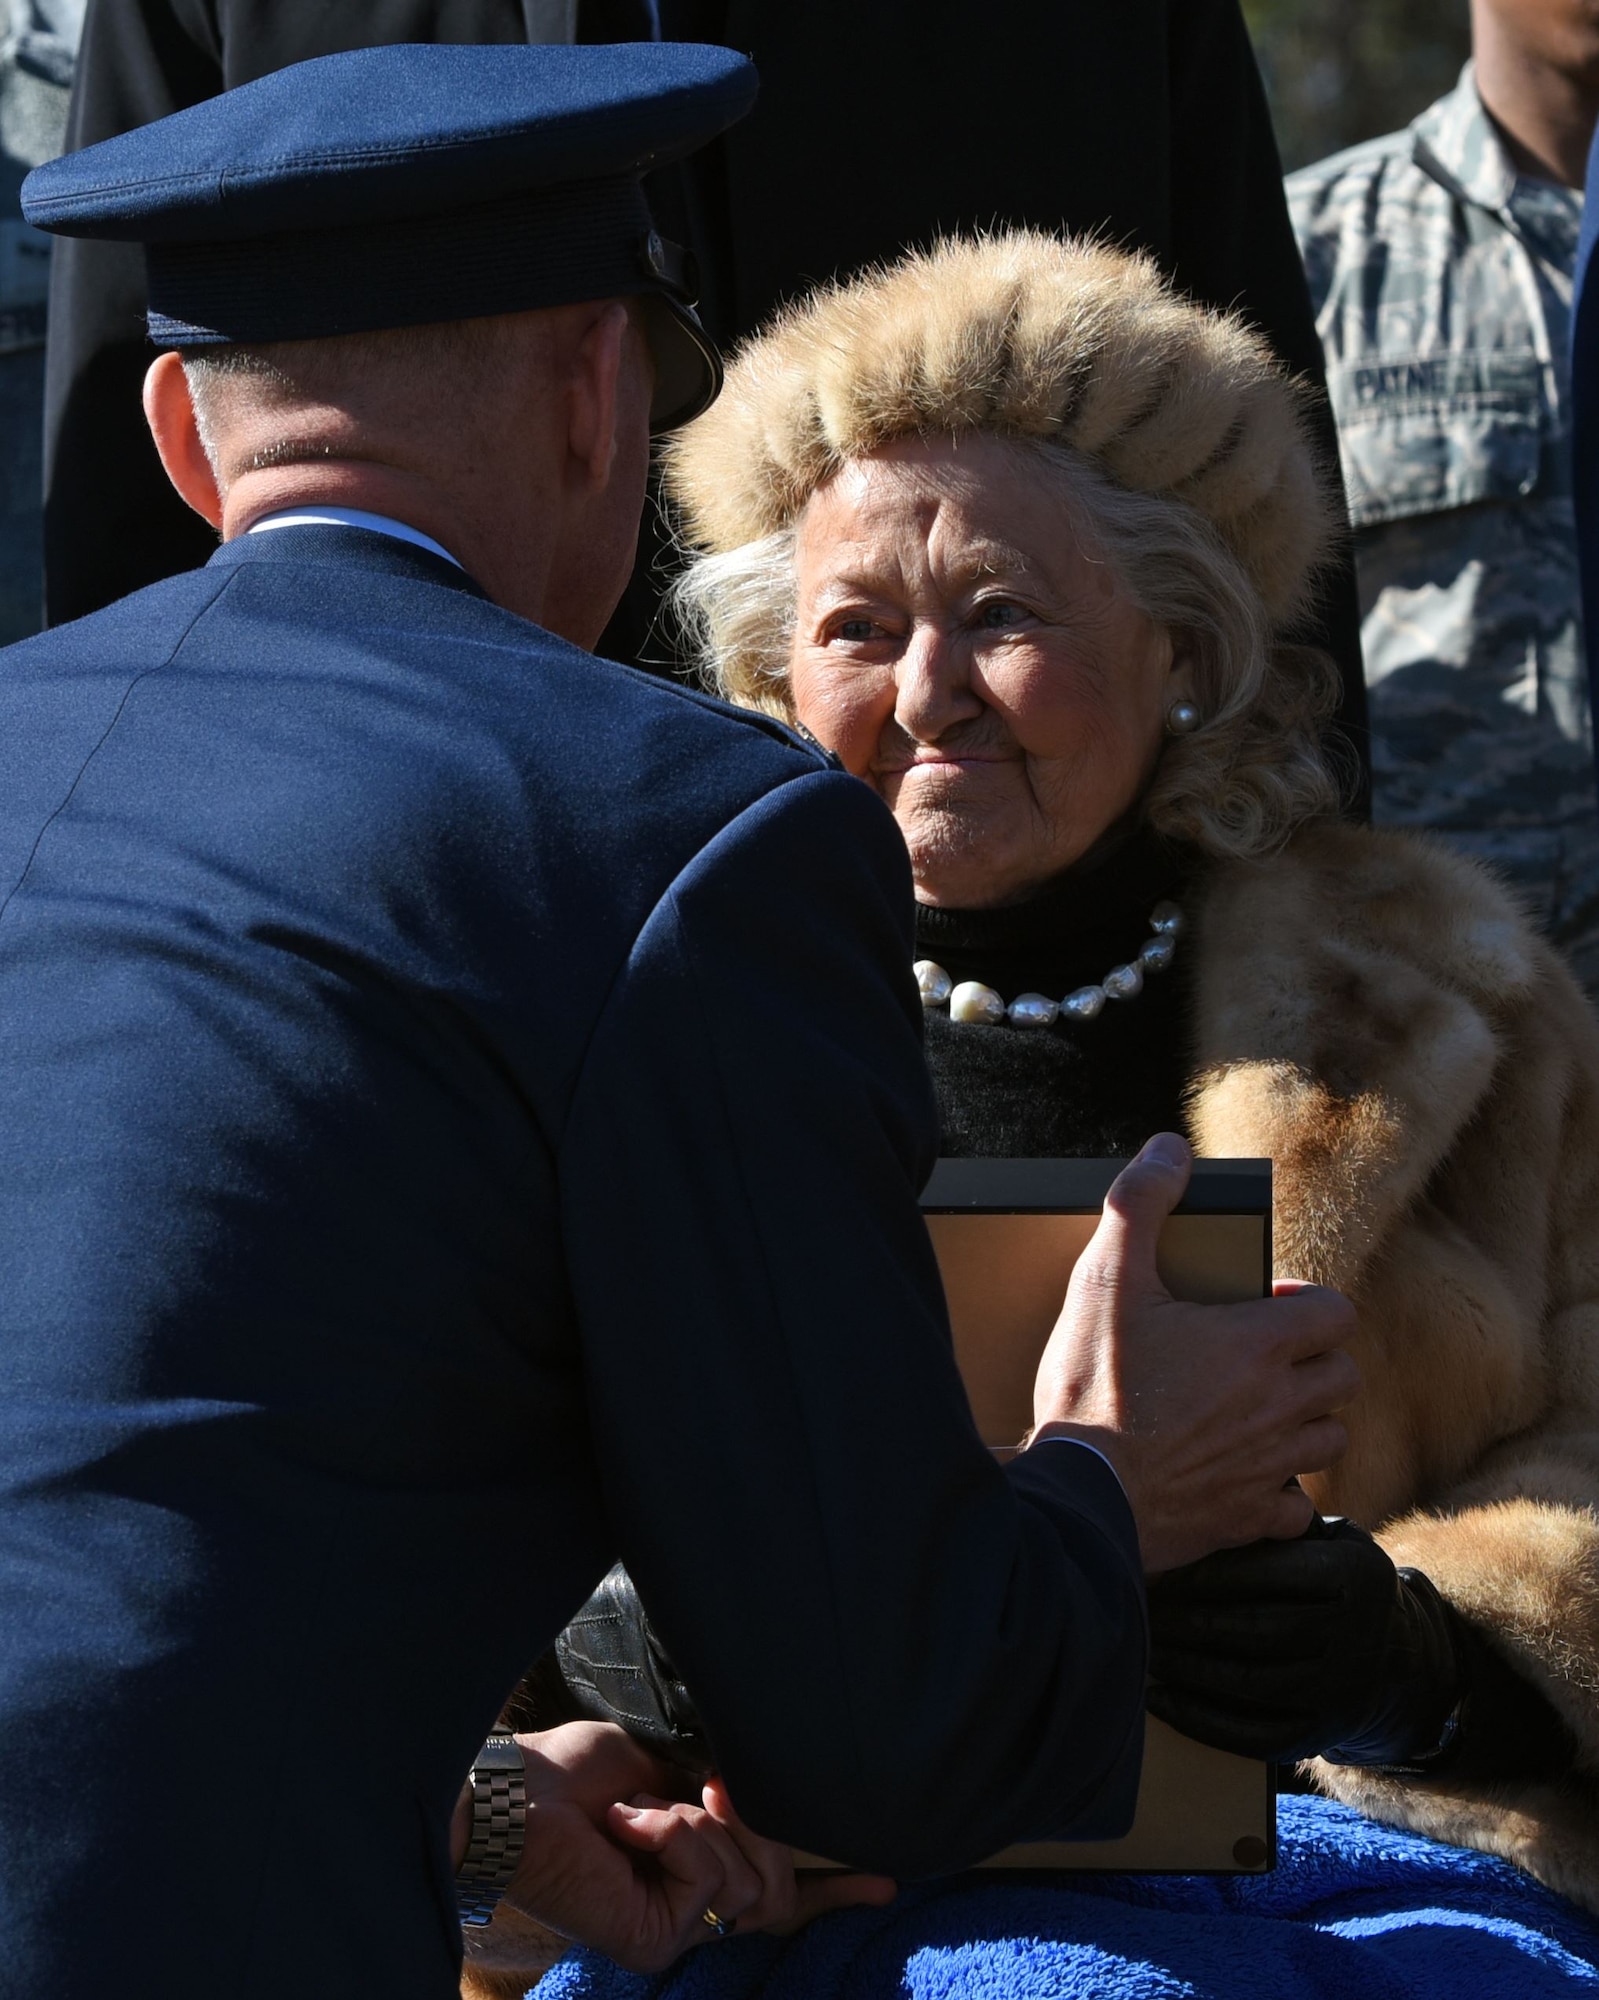 U.S. Air Force Col. Daniel Lasica, 20th Fighter Wing commander, presents Jacqueline Heckel with a Prisoner of War Medal for the sacrifices her late husband, Col. Charles C. Heckel, made as a World War II prisoner of war at Shaw Air Force Base, S.C., Jan. 19, 2018.